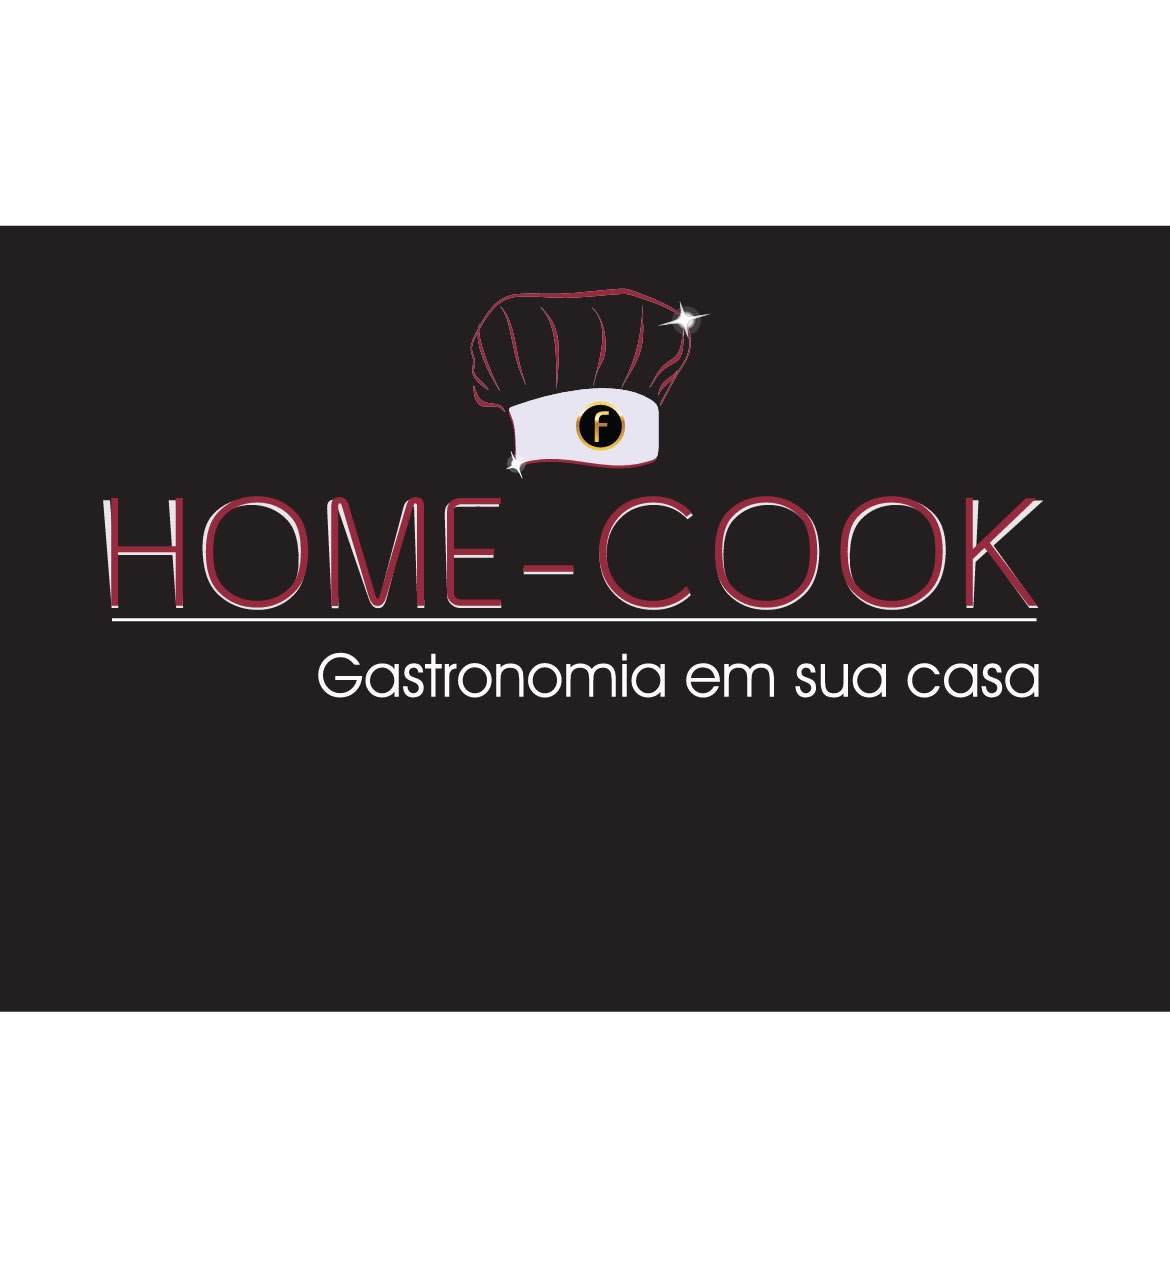 HOME - COOK